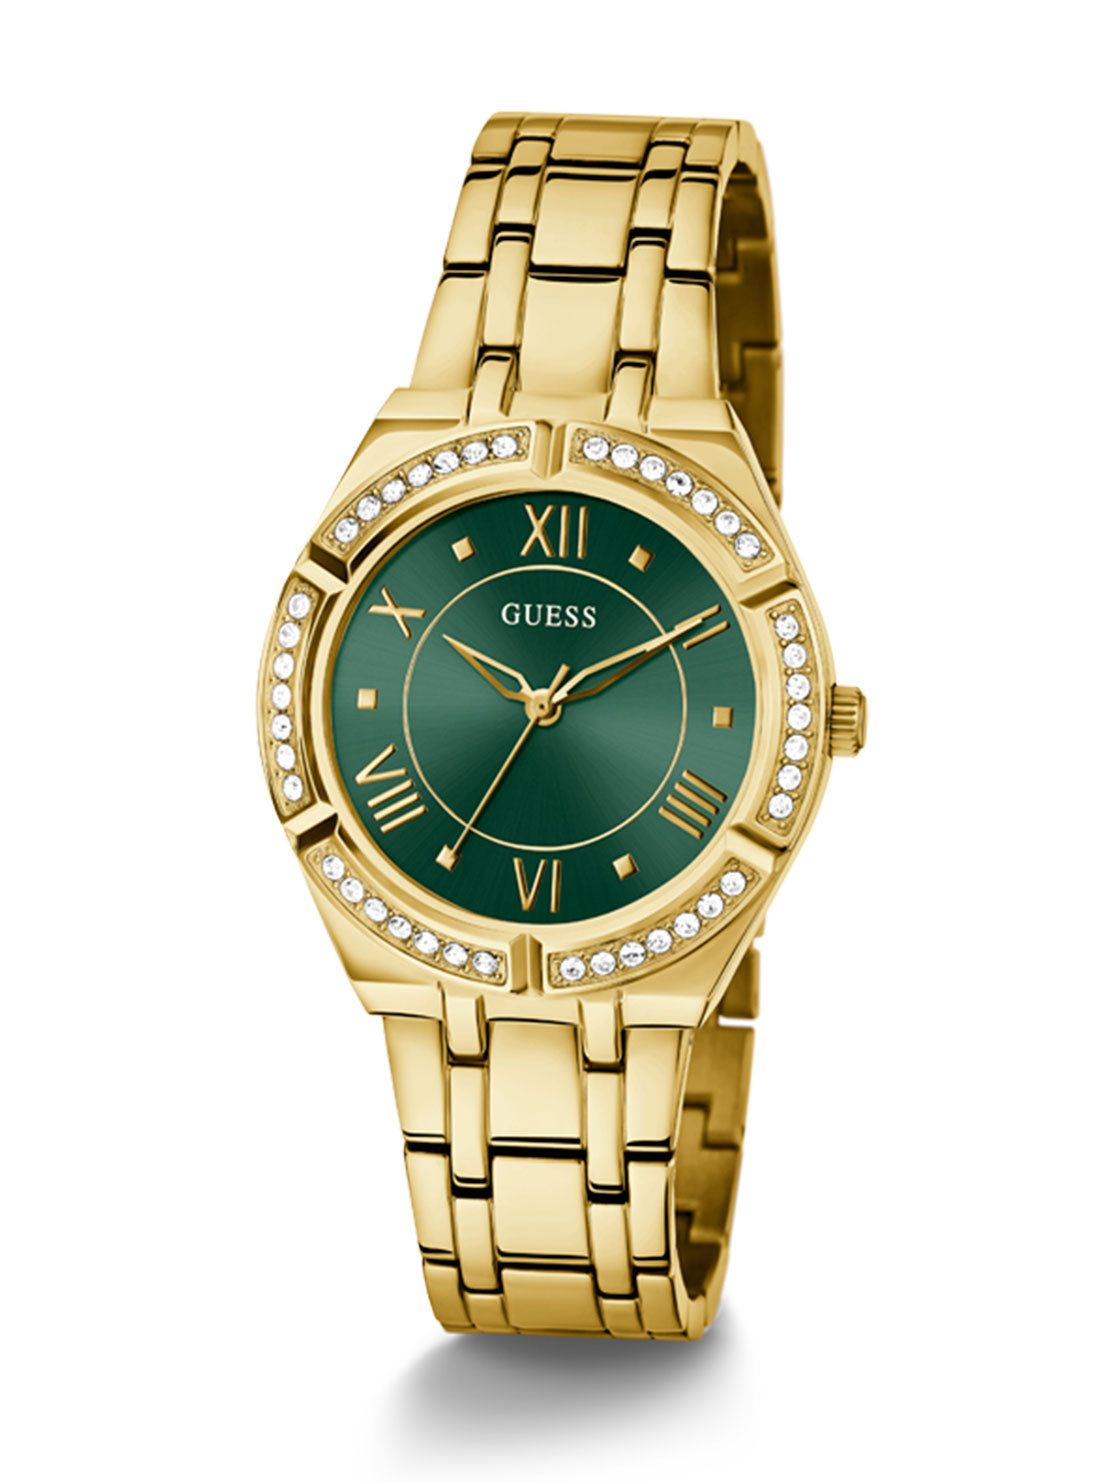 GUESS Women's Gold Cosmo Green Crystal Watch GW0033L8 Full View